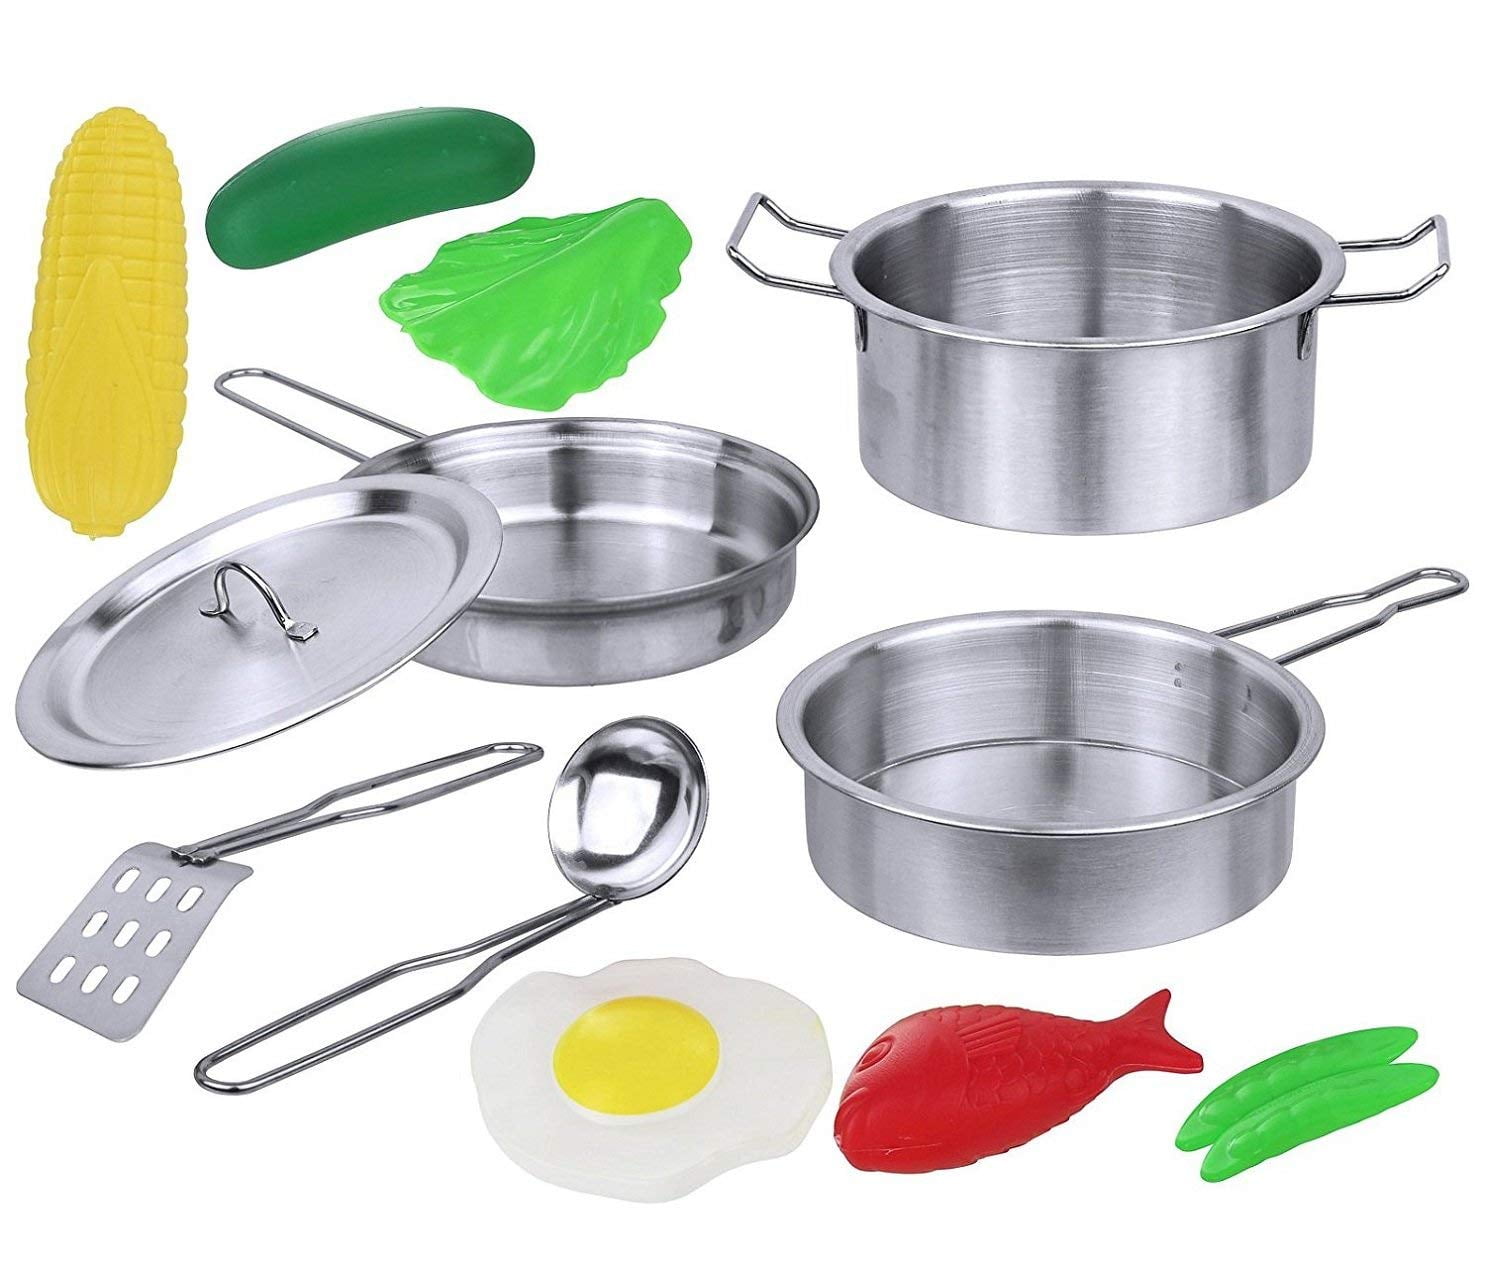 Kitchen Playset Accessories Toys Stainless Steel Cookware Pots and Pans Set, 